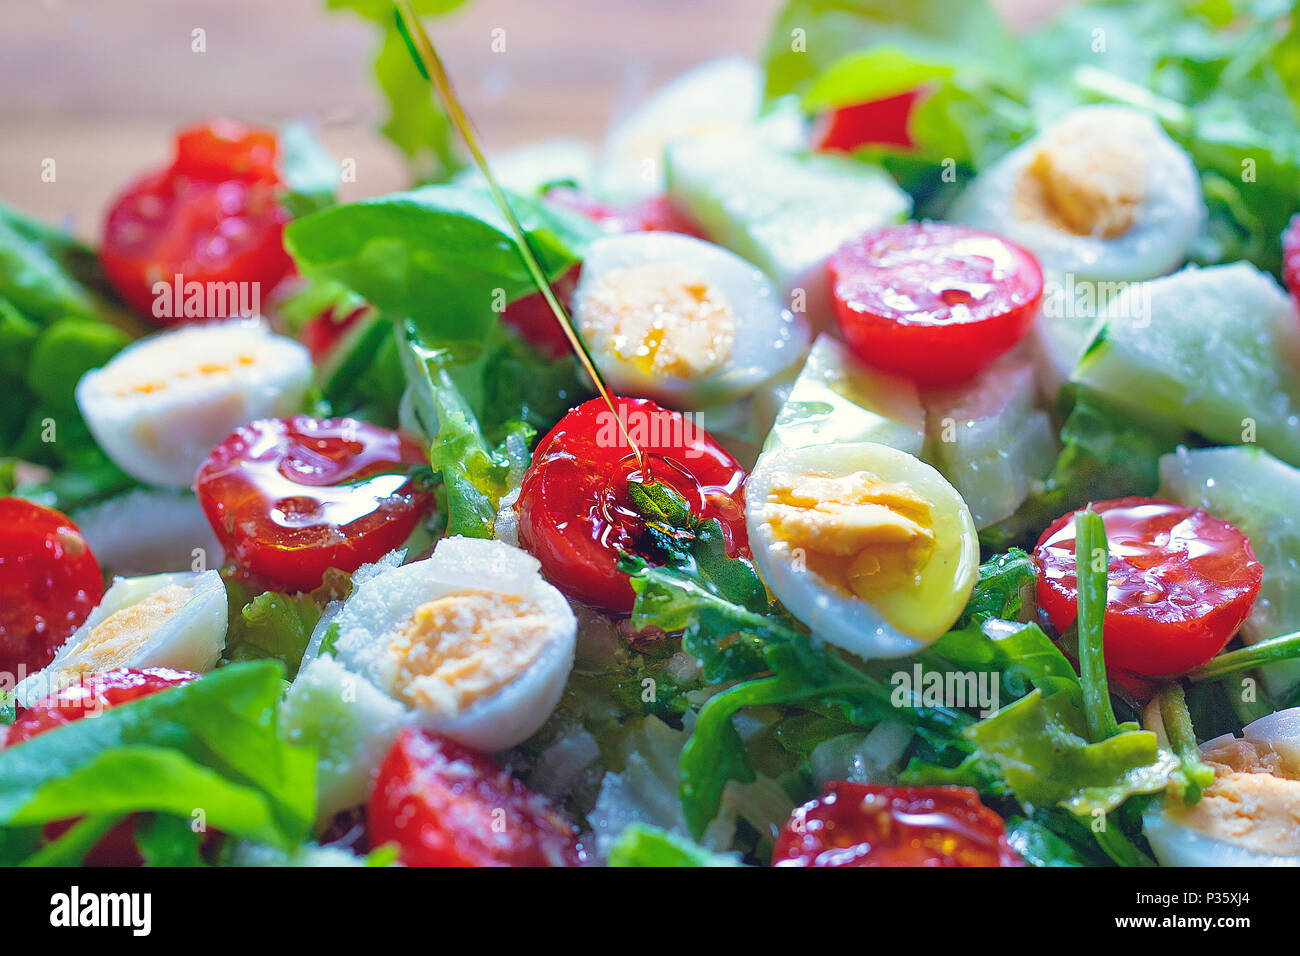 Dieting salad with lettuce, cherry tomatoes, cucumber and quail eggs Stock Photo